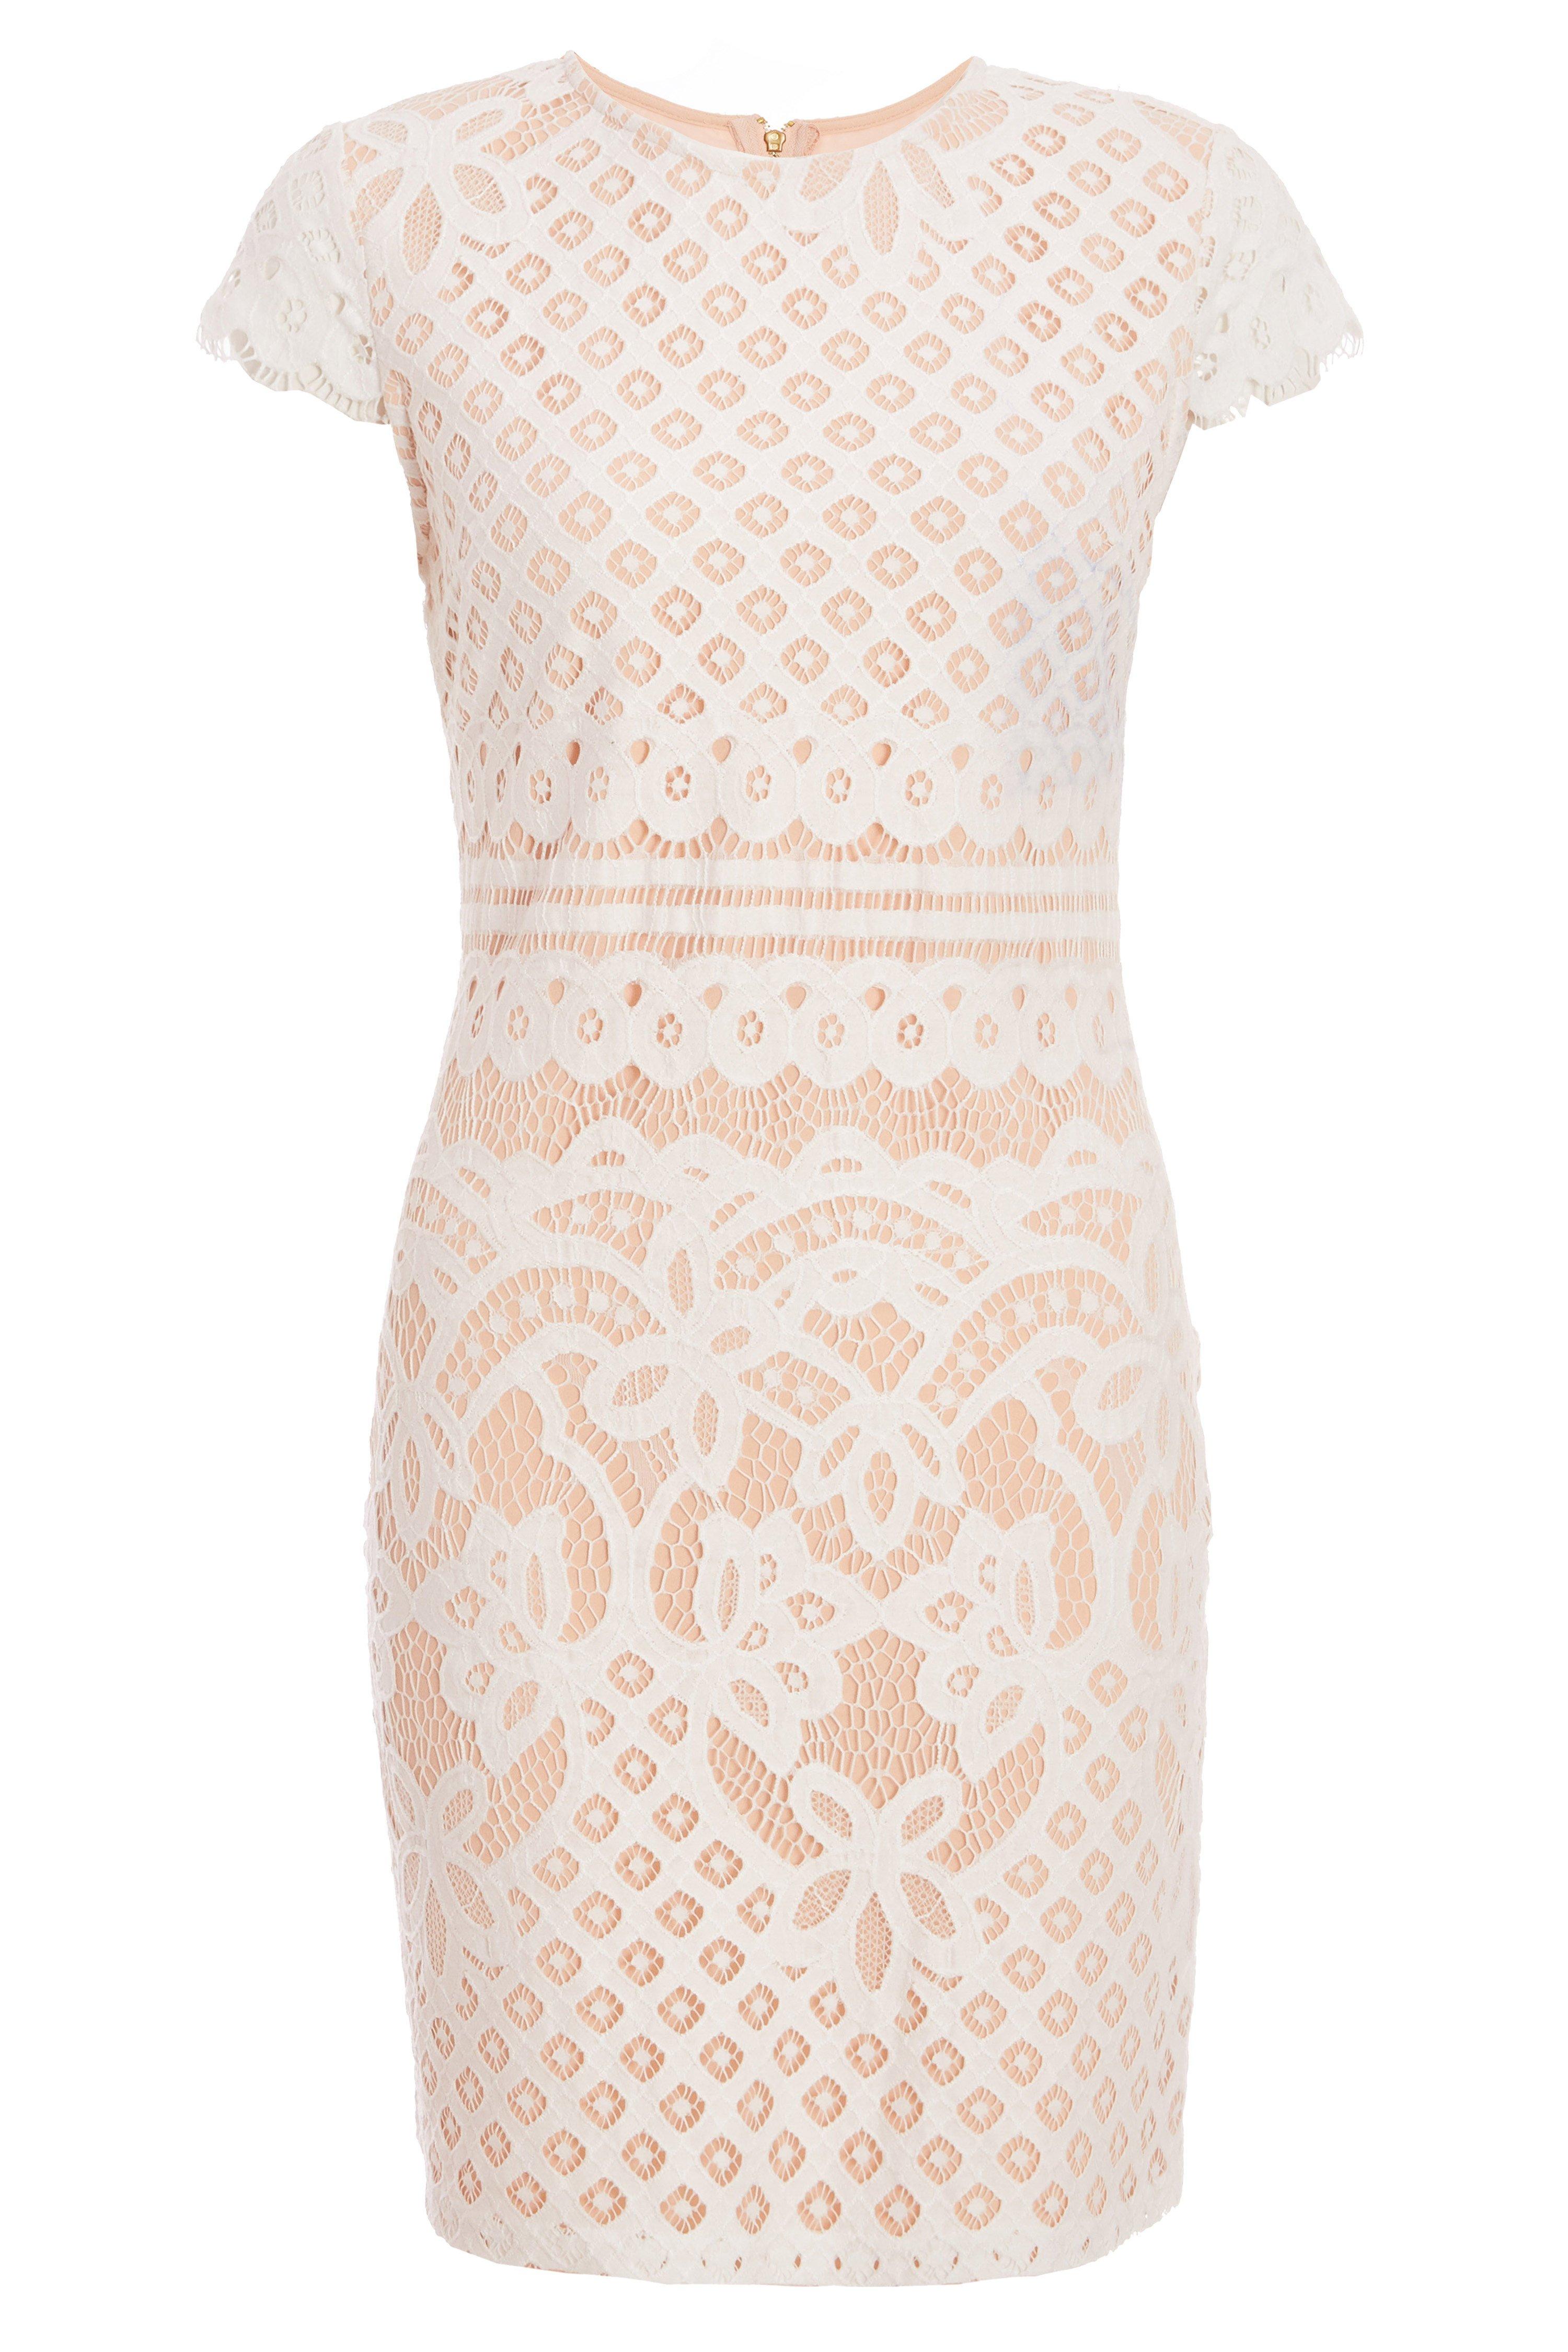 Cream And Nude Lace Cap Sleeve Bodycon Dress - Quiz Clothing